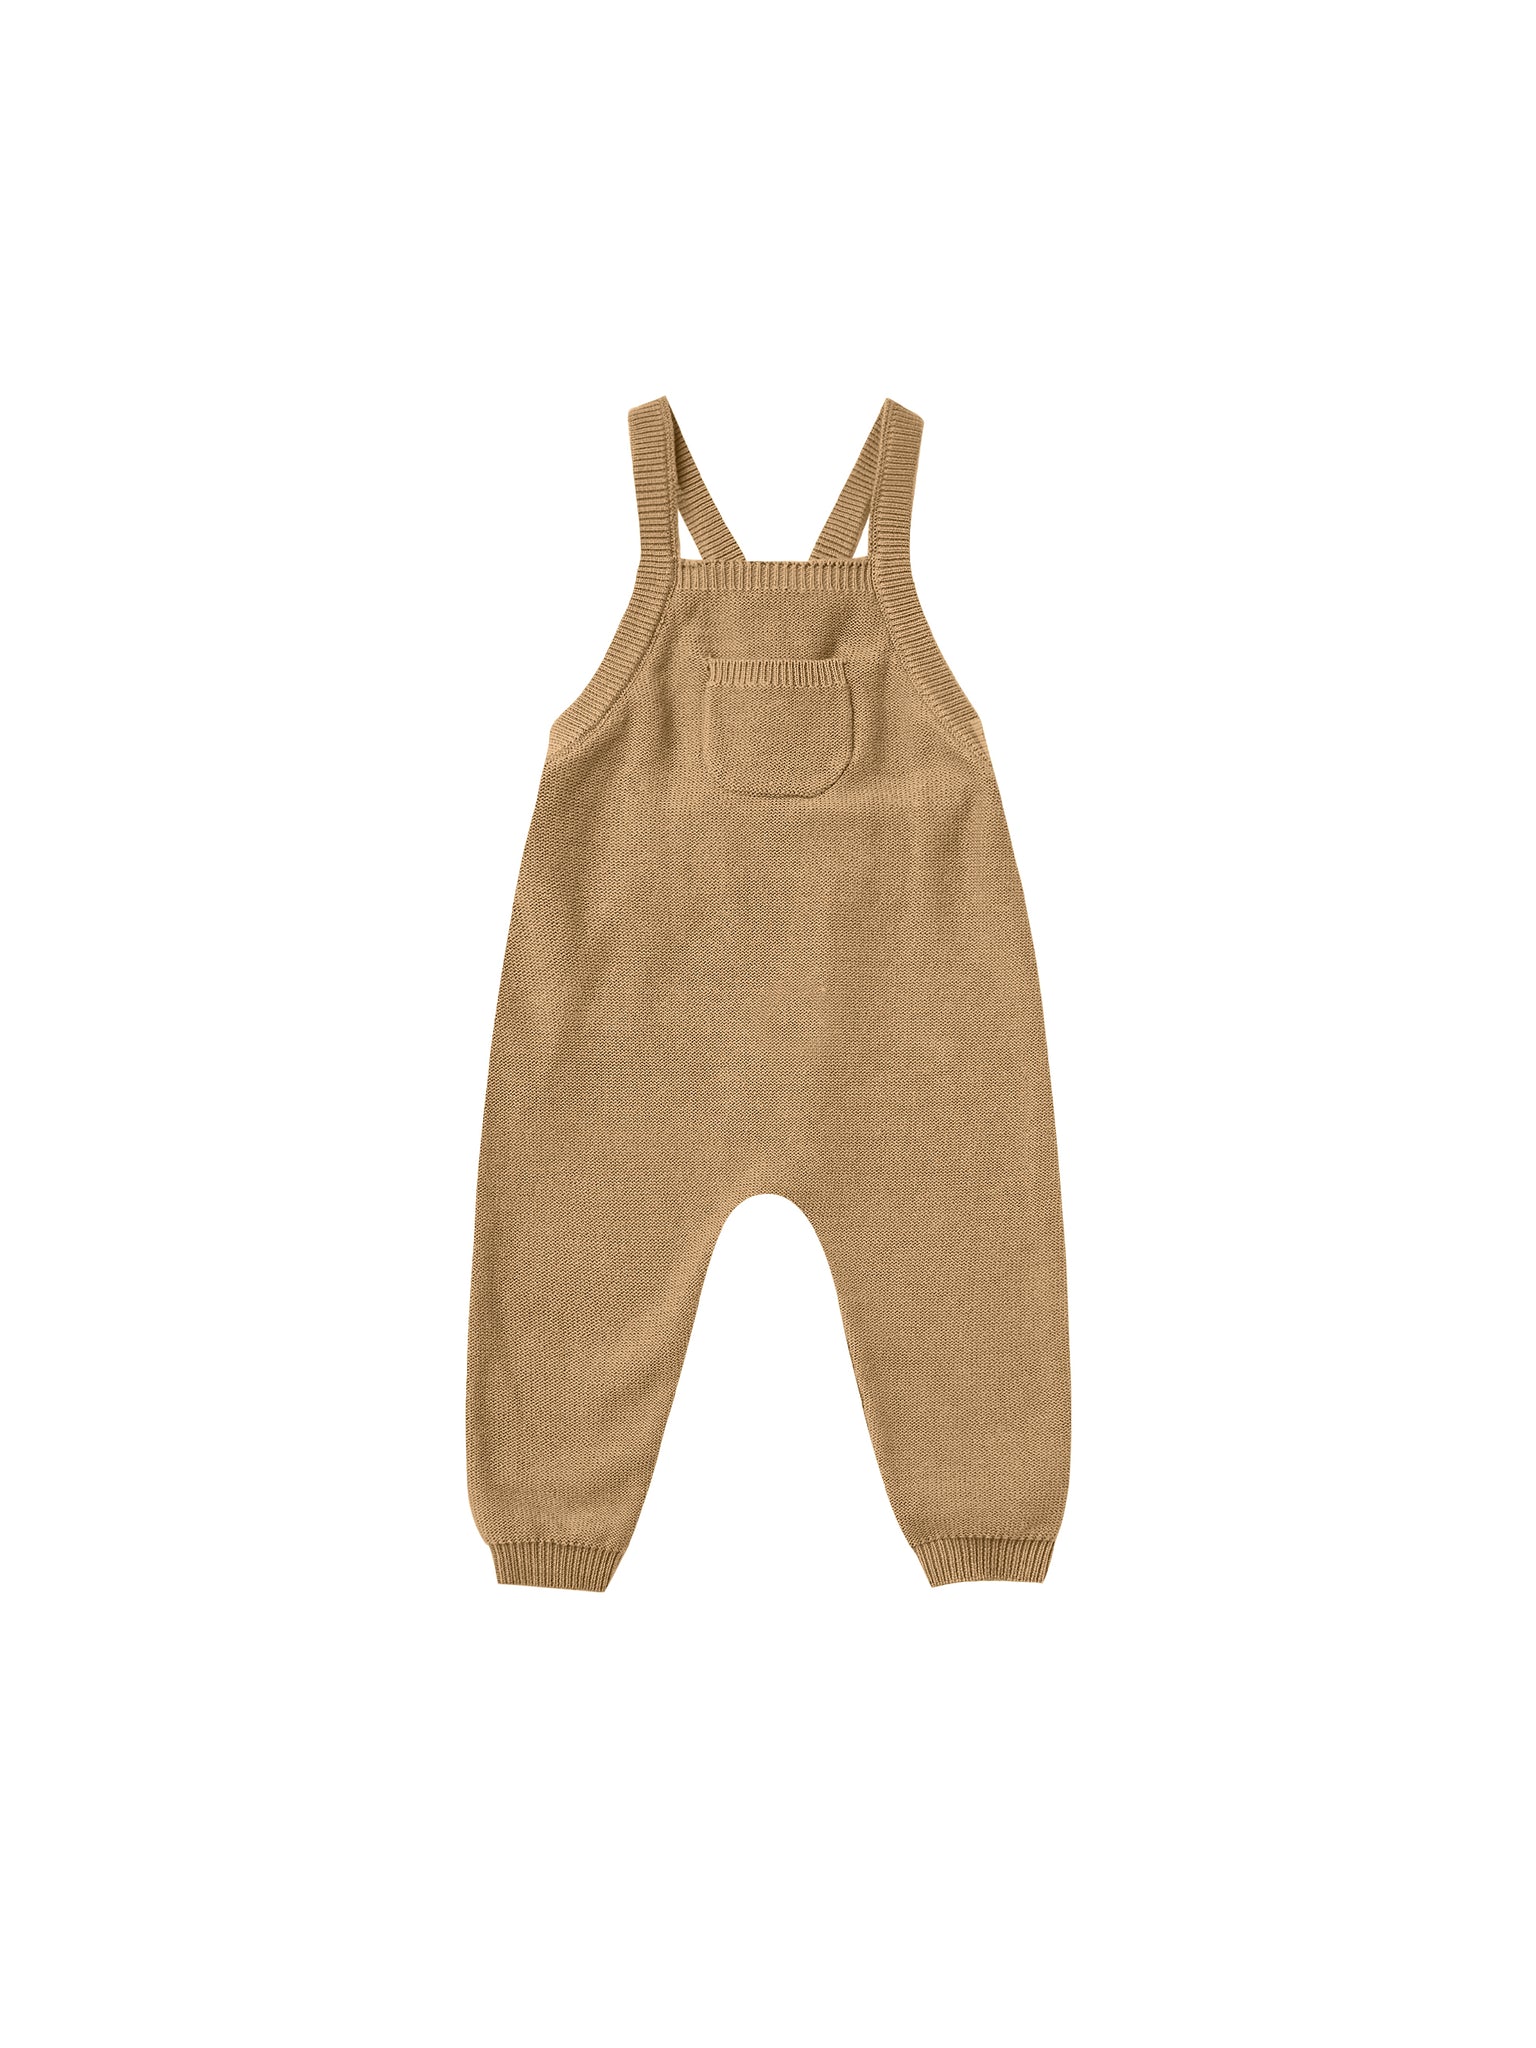 Knit Overall (Honey)